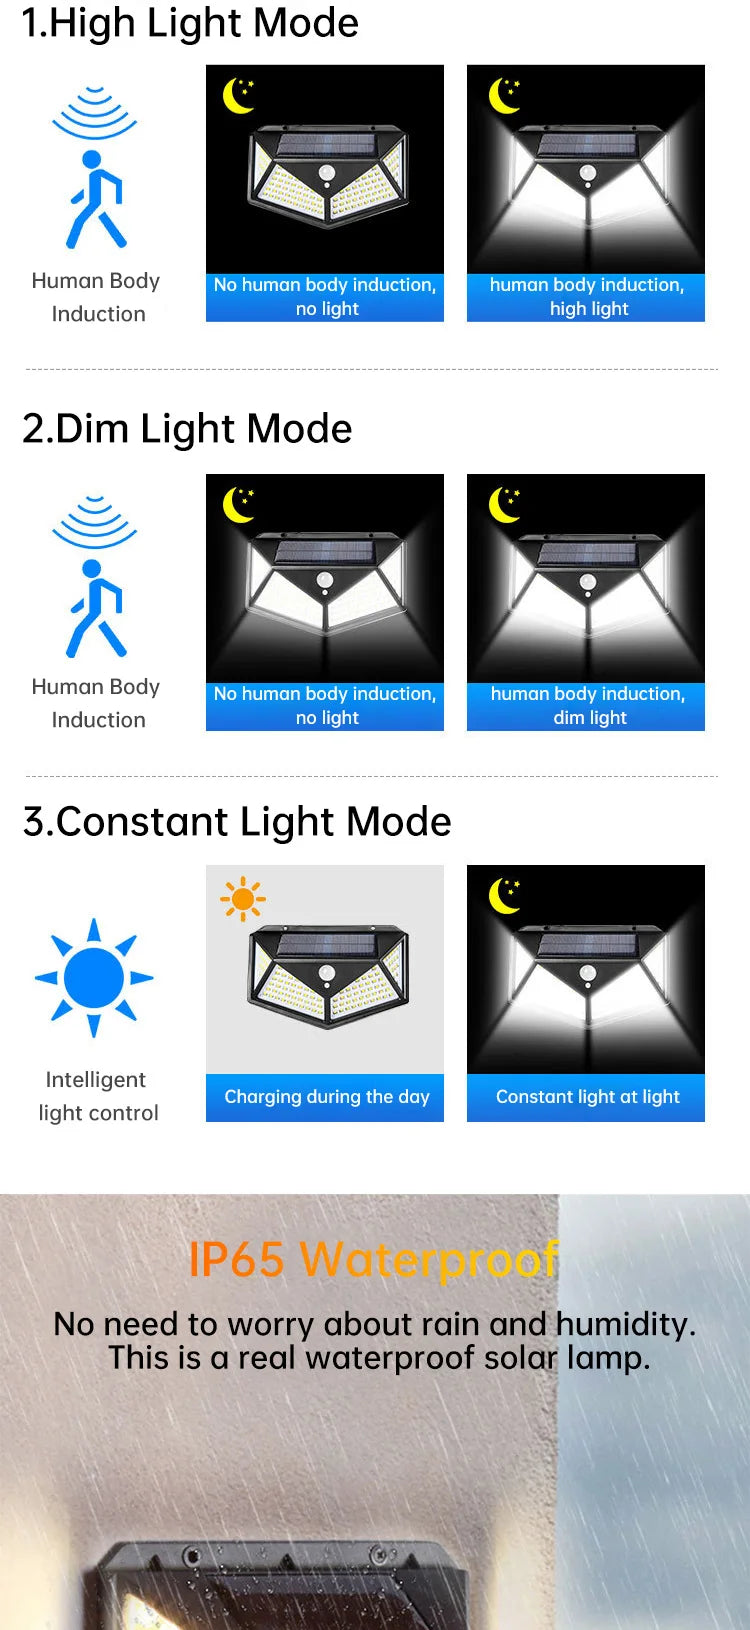 Solar-powered garden lamp with three modes: high, dim, and constant light, waterproof for outdoor use.